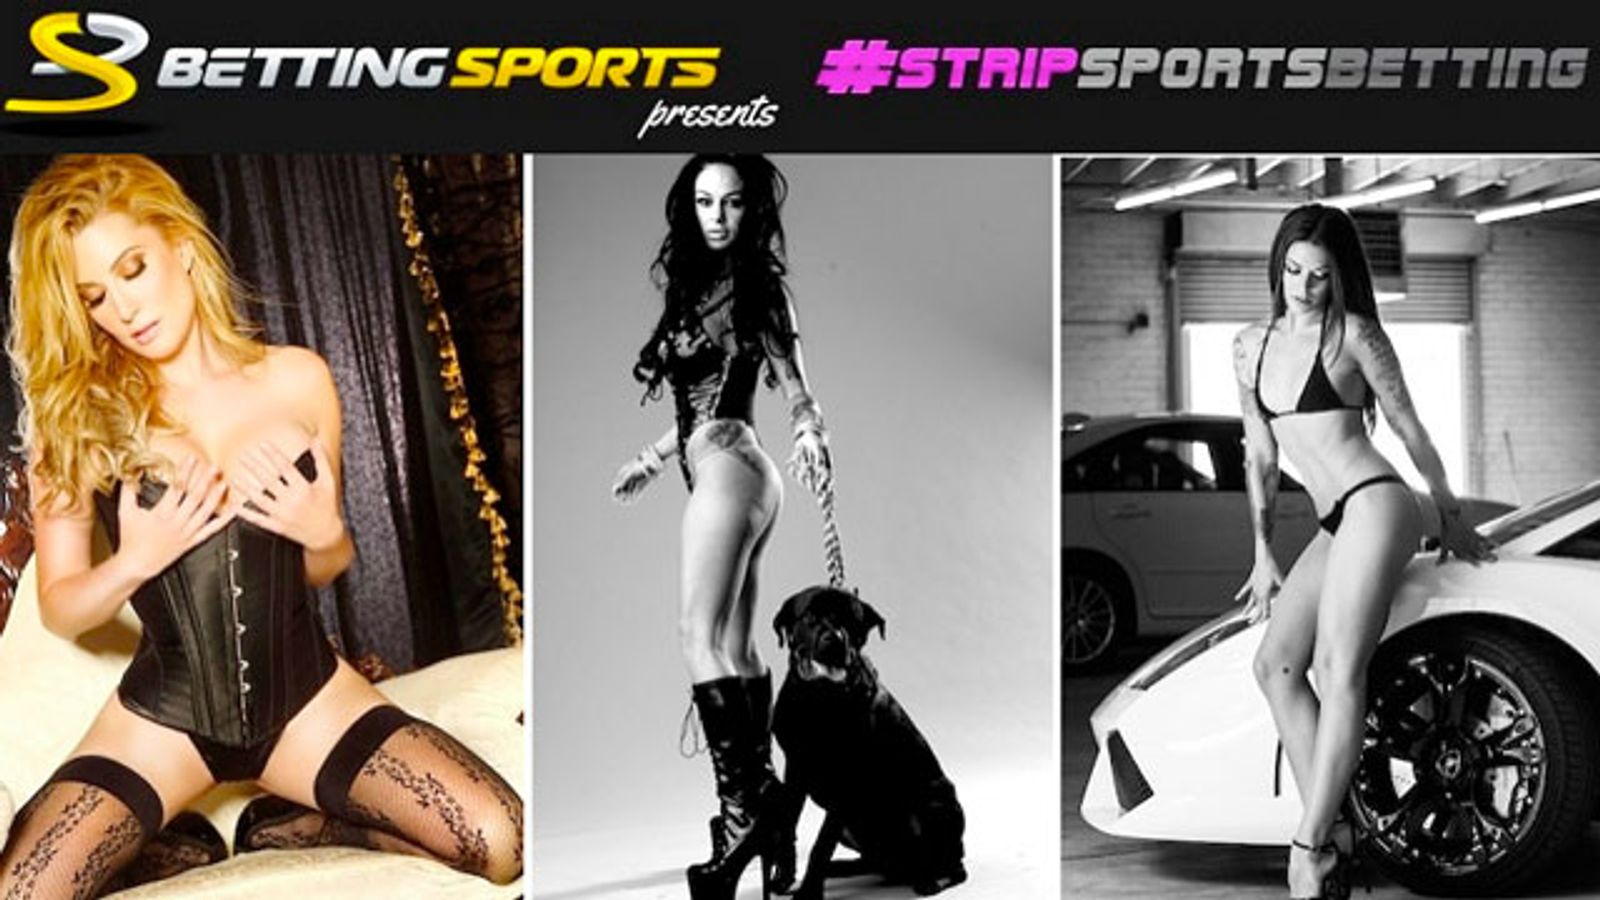 Get Ready for Strip Sports Betting's October Schedule of Girls